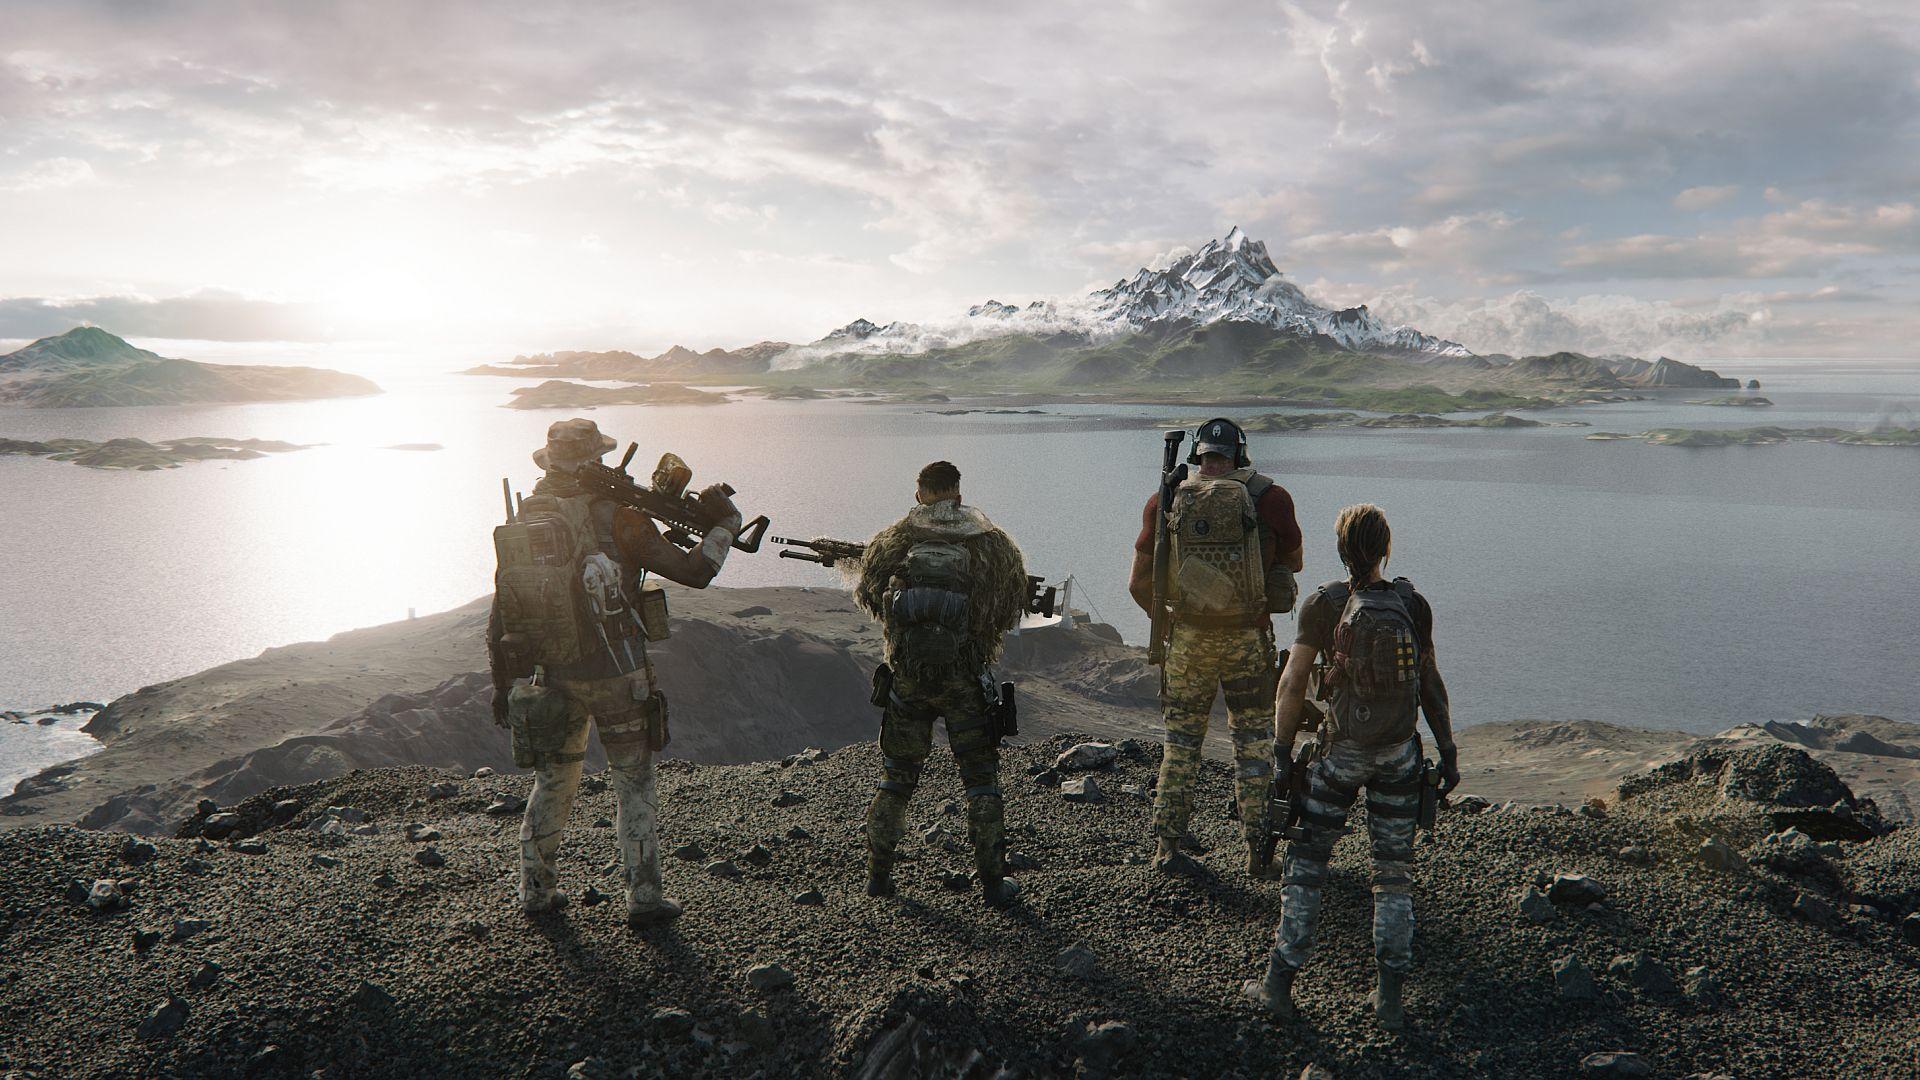 Ghost Recon Breakpoint's fictional island setting was “not a